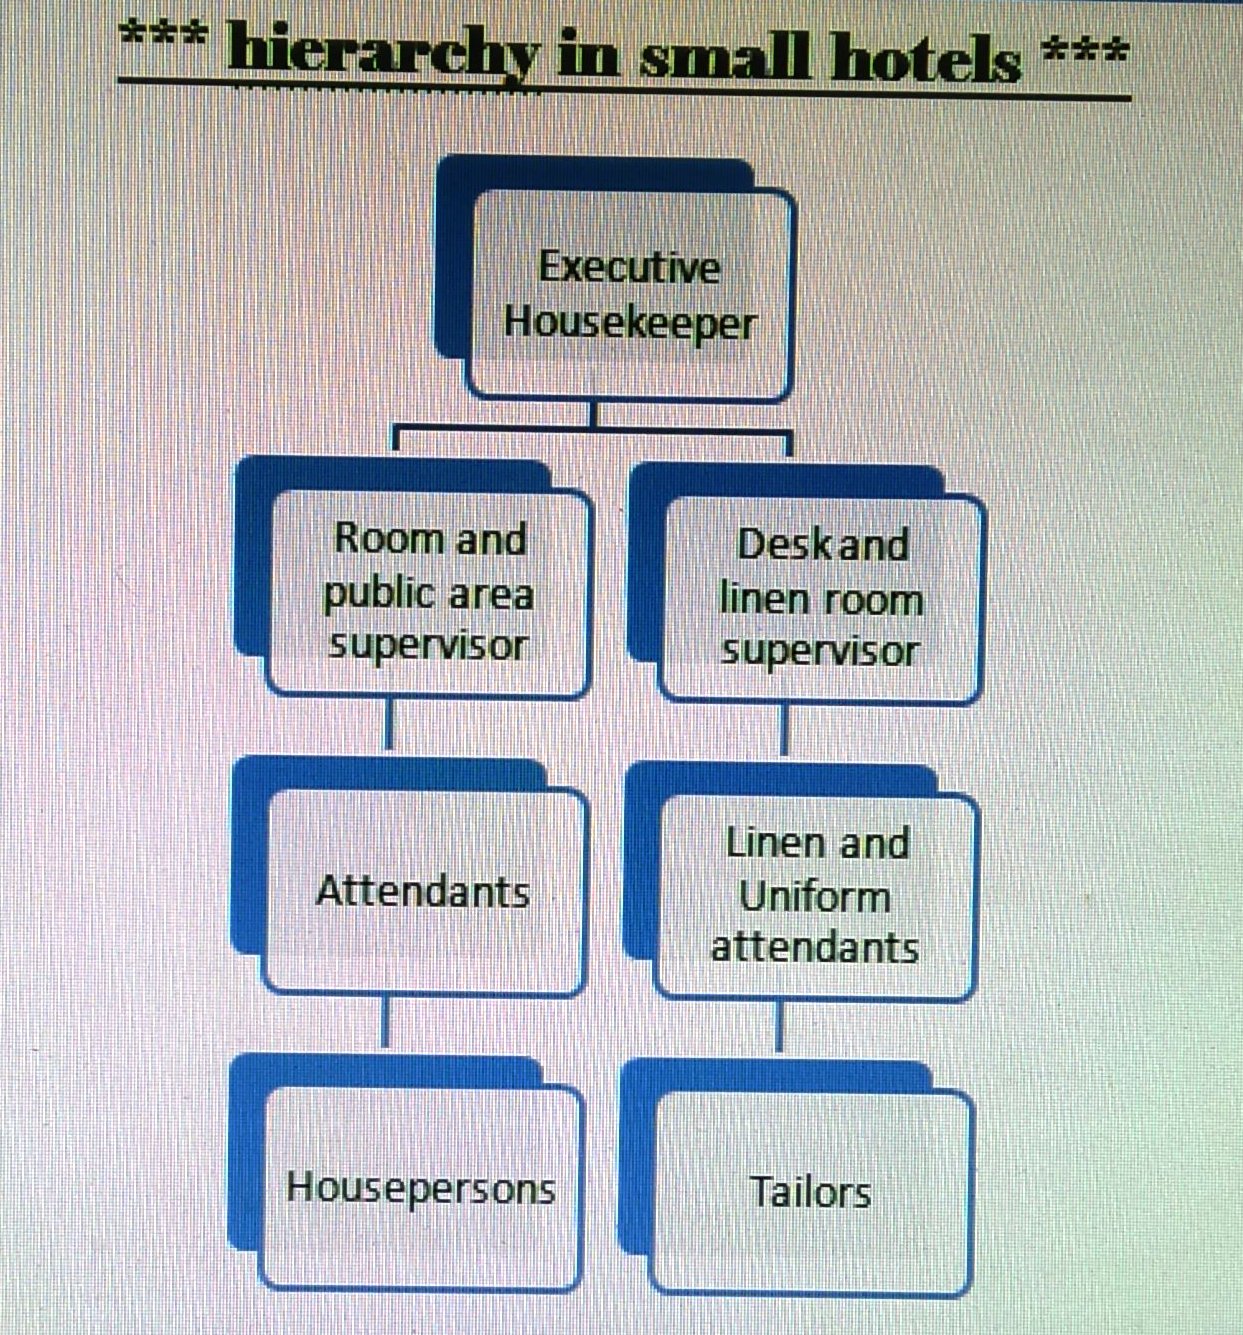 Housekeeping Organizational Chart In Small Hotel